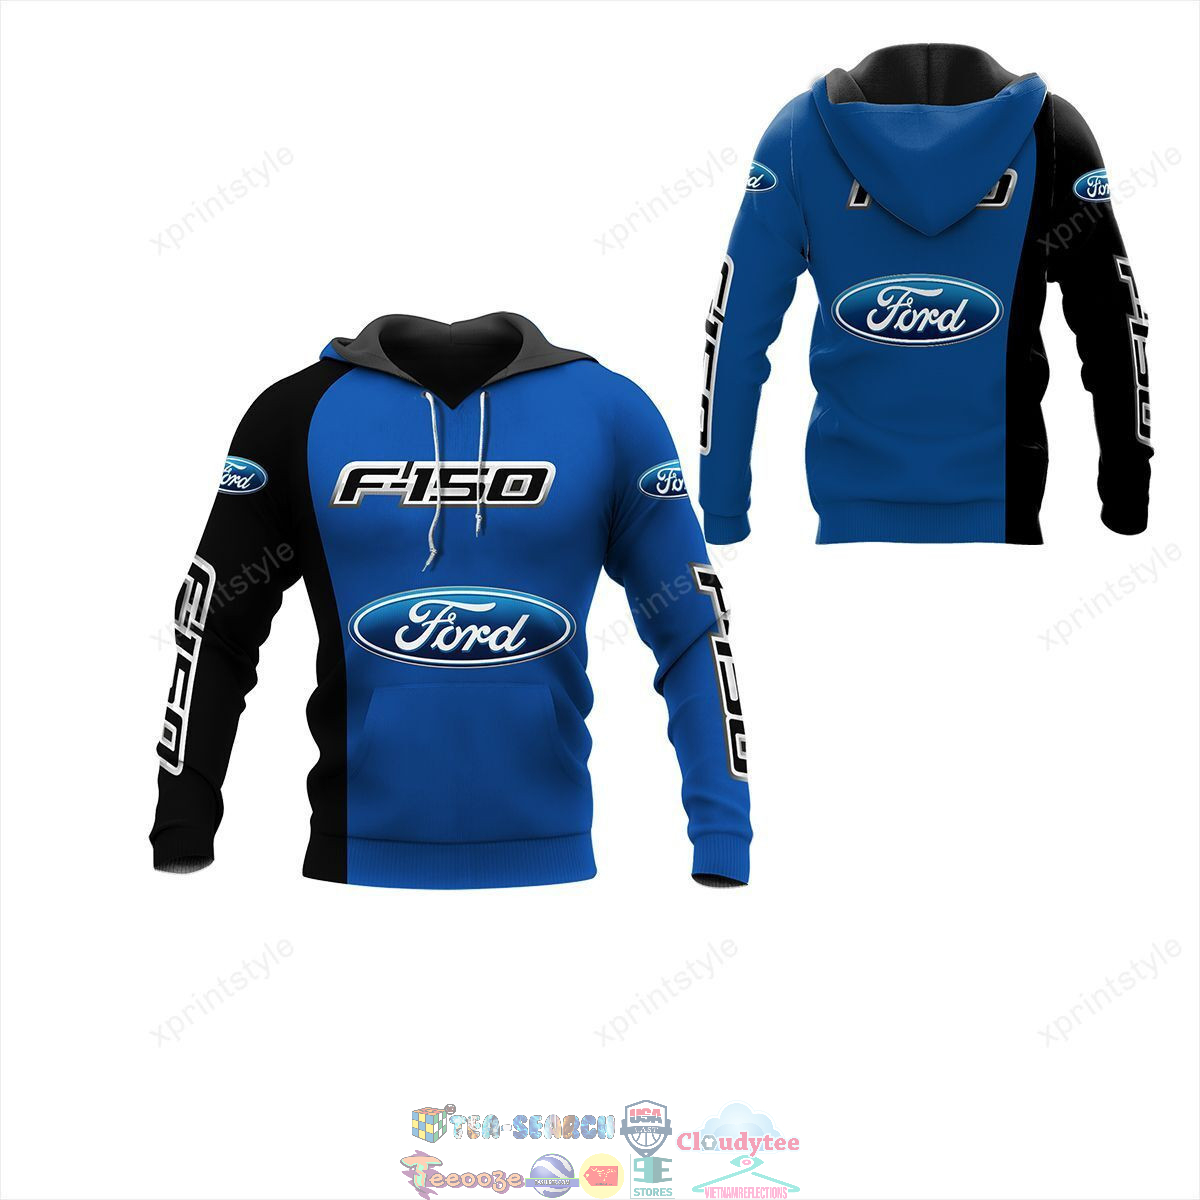 Ford F150 ver 12 hoodie and t-shirt